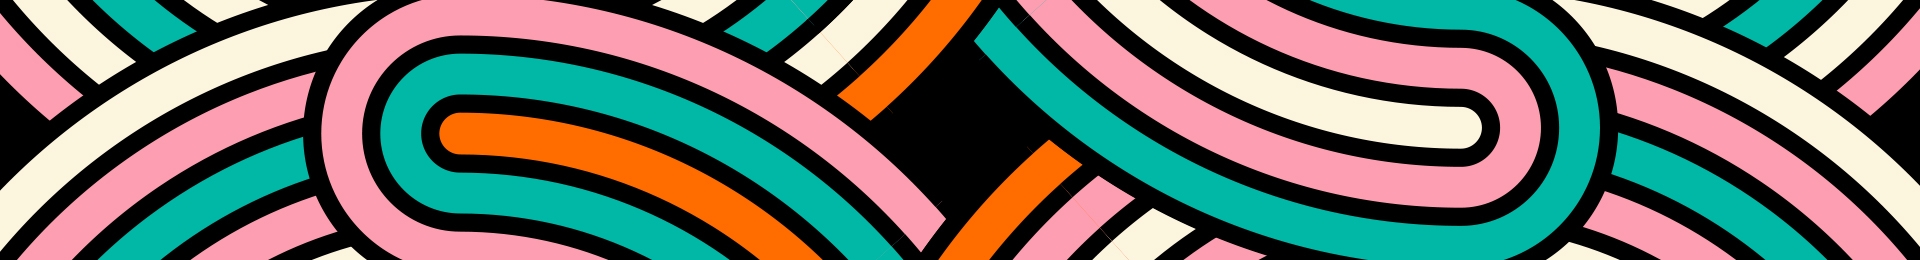 Loops and lines banner